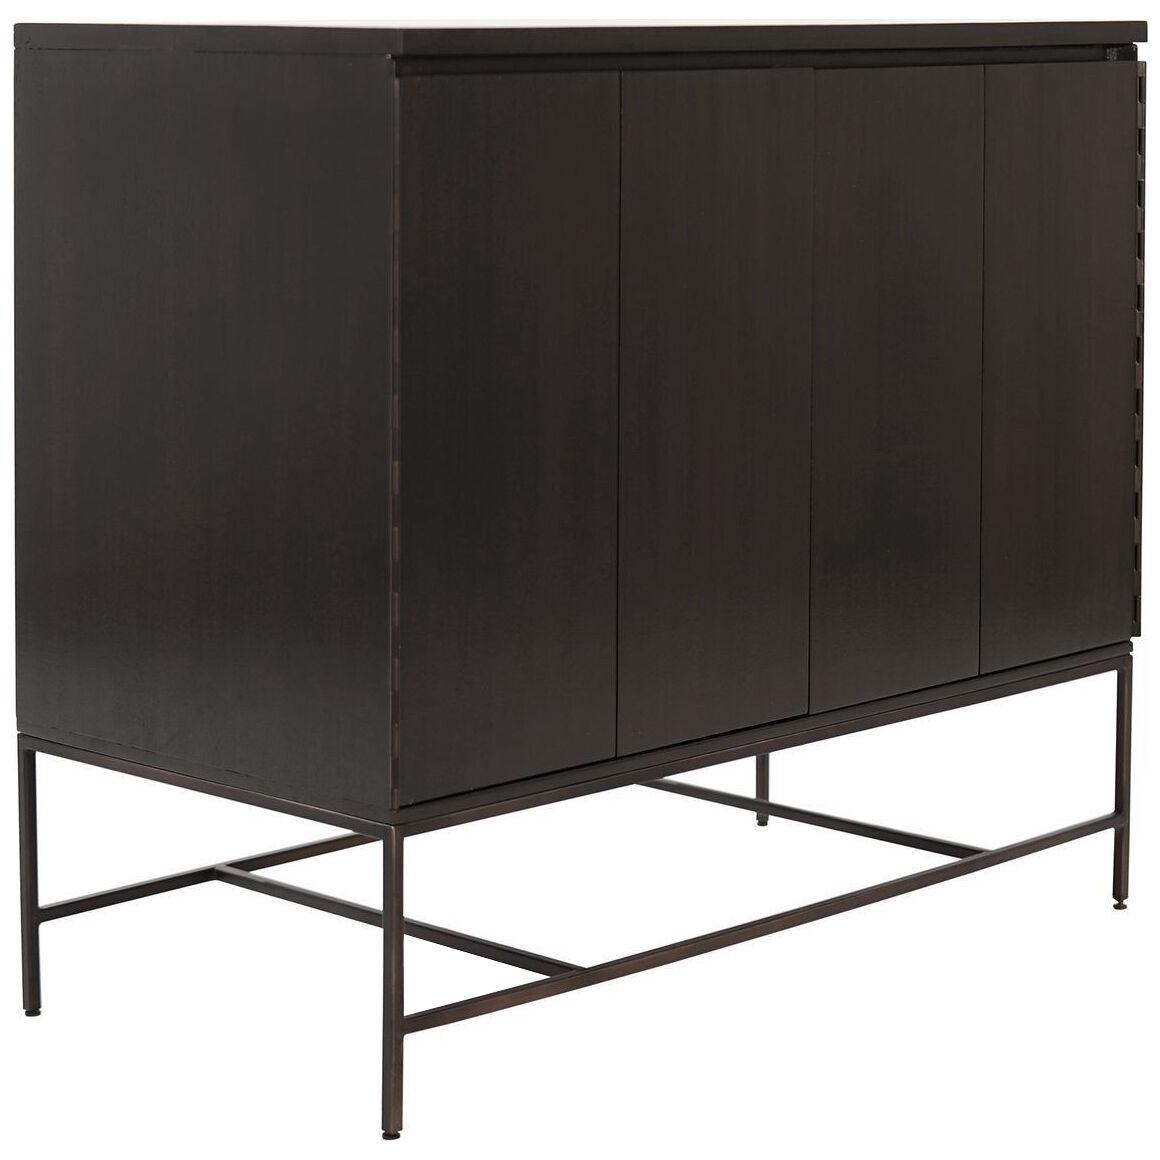 Bronze and Ebony Cabinet by Paul McCobb, Calvin Group, C. 1950s